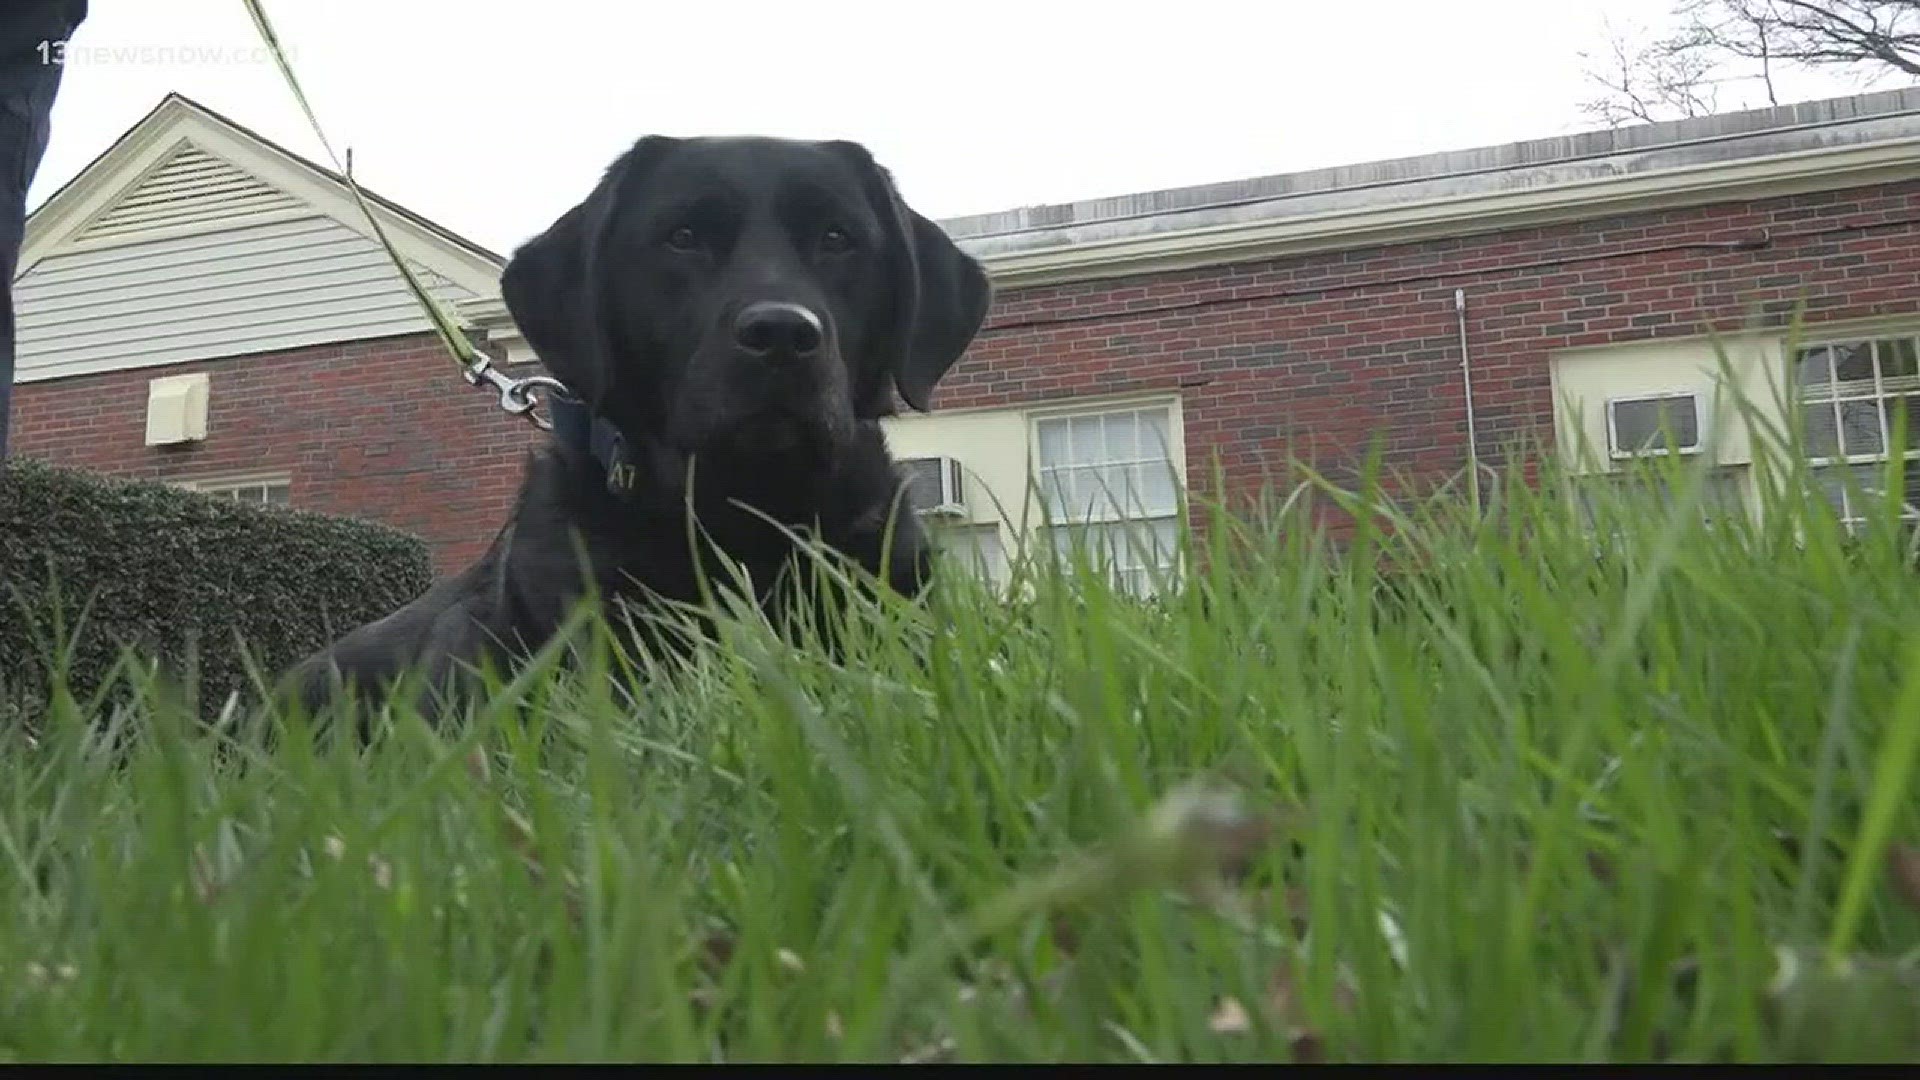 13News Now Crystal Harper got to meet the talented K9 and tells us how dog found an arson suspect right under her nose.